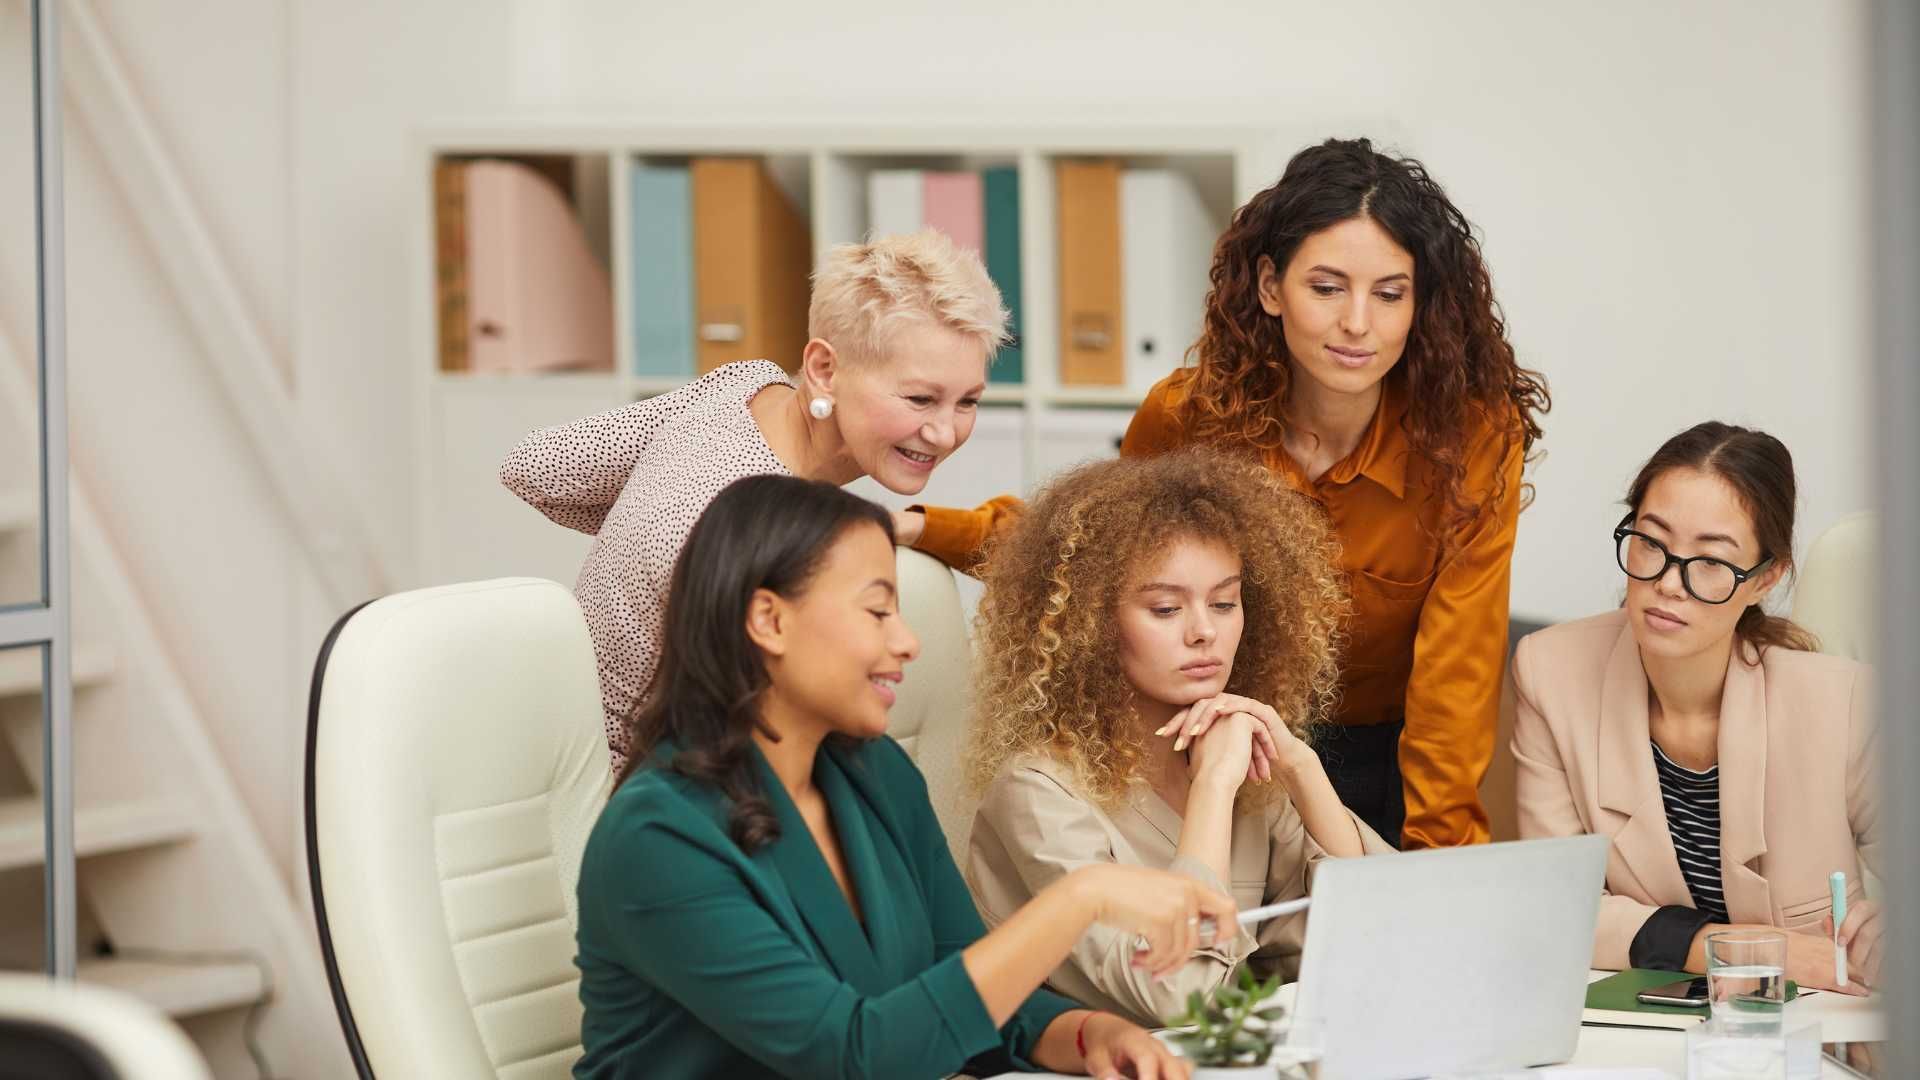 a group of office women discussing what is on the computer screen on the table